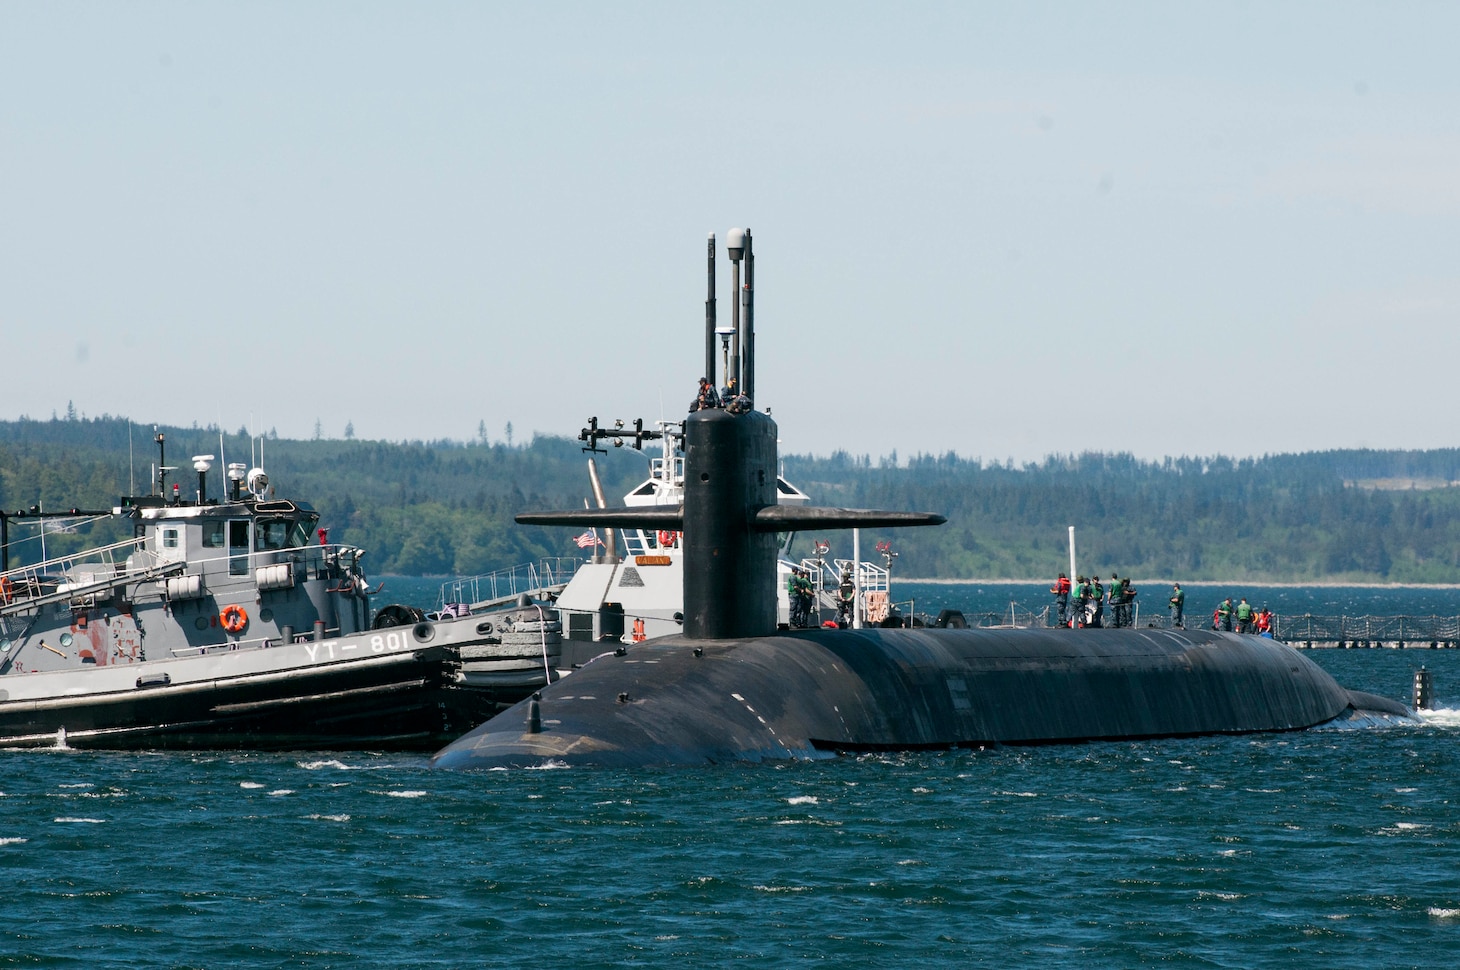 BANGOR, Wash. (May 6, 2016) - The Ohio-class ballistic-missile submarine USS Pennsylvania (SSBN 735) returns to Naval Base Kitsap-Bangor following a routine strategic deterrent patrol. Pennsylvania is one of eight ballistic-missile submarines stationed at the base providing the most survivable leg of the strategic deterrence triad for the United States. (U.S. Navy photo by Lt. Cmdr. Michael Smith/Released)